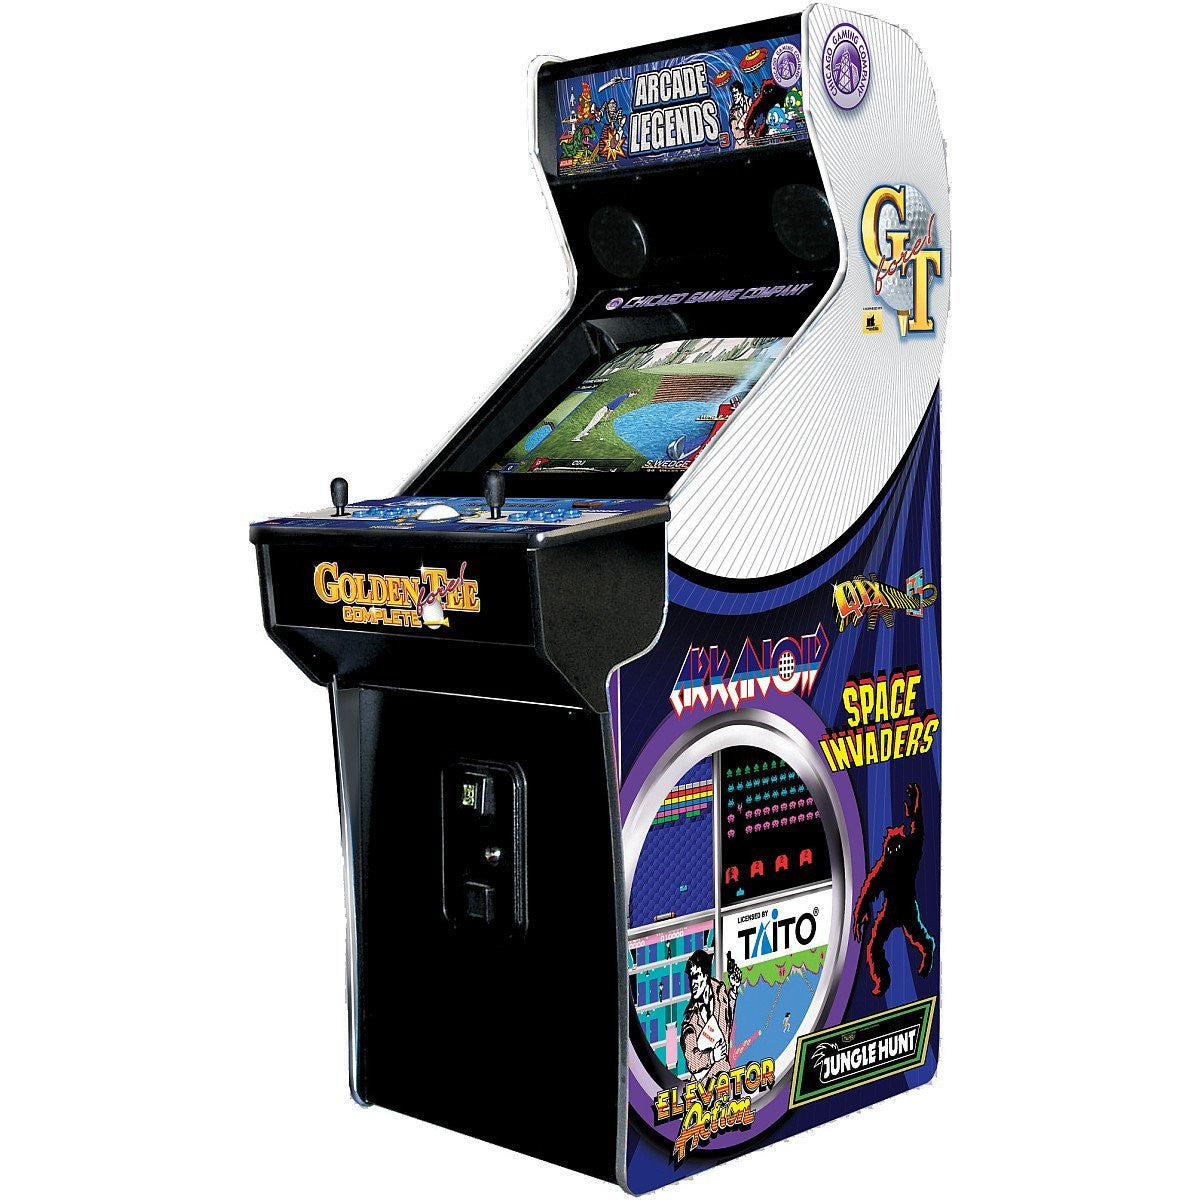 Chicago Gaming Arcade Legends 3 Arcade Game With 130 Games And